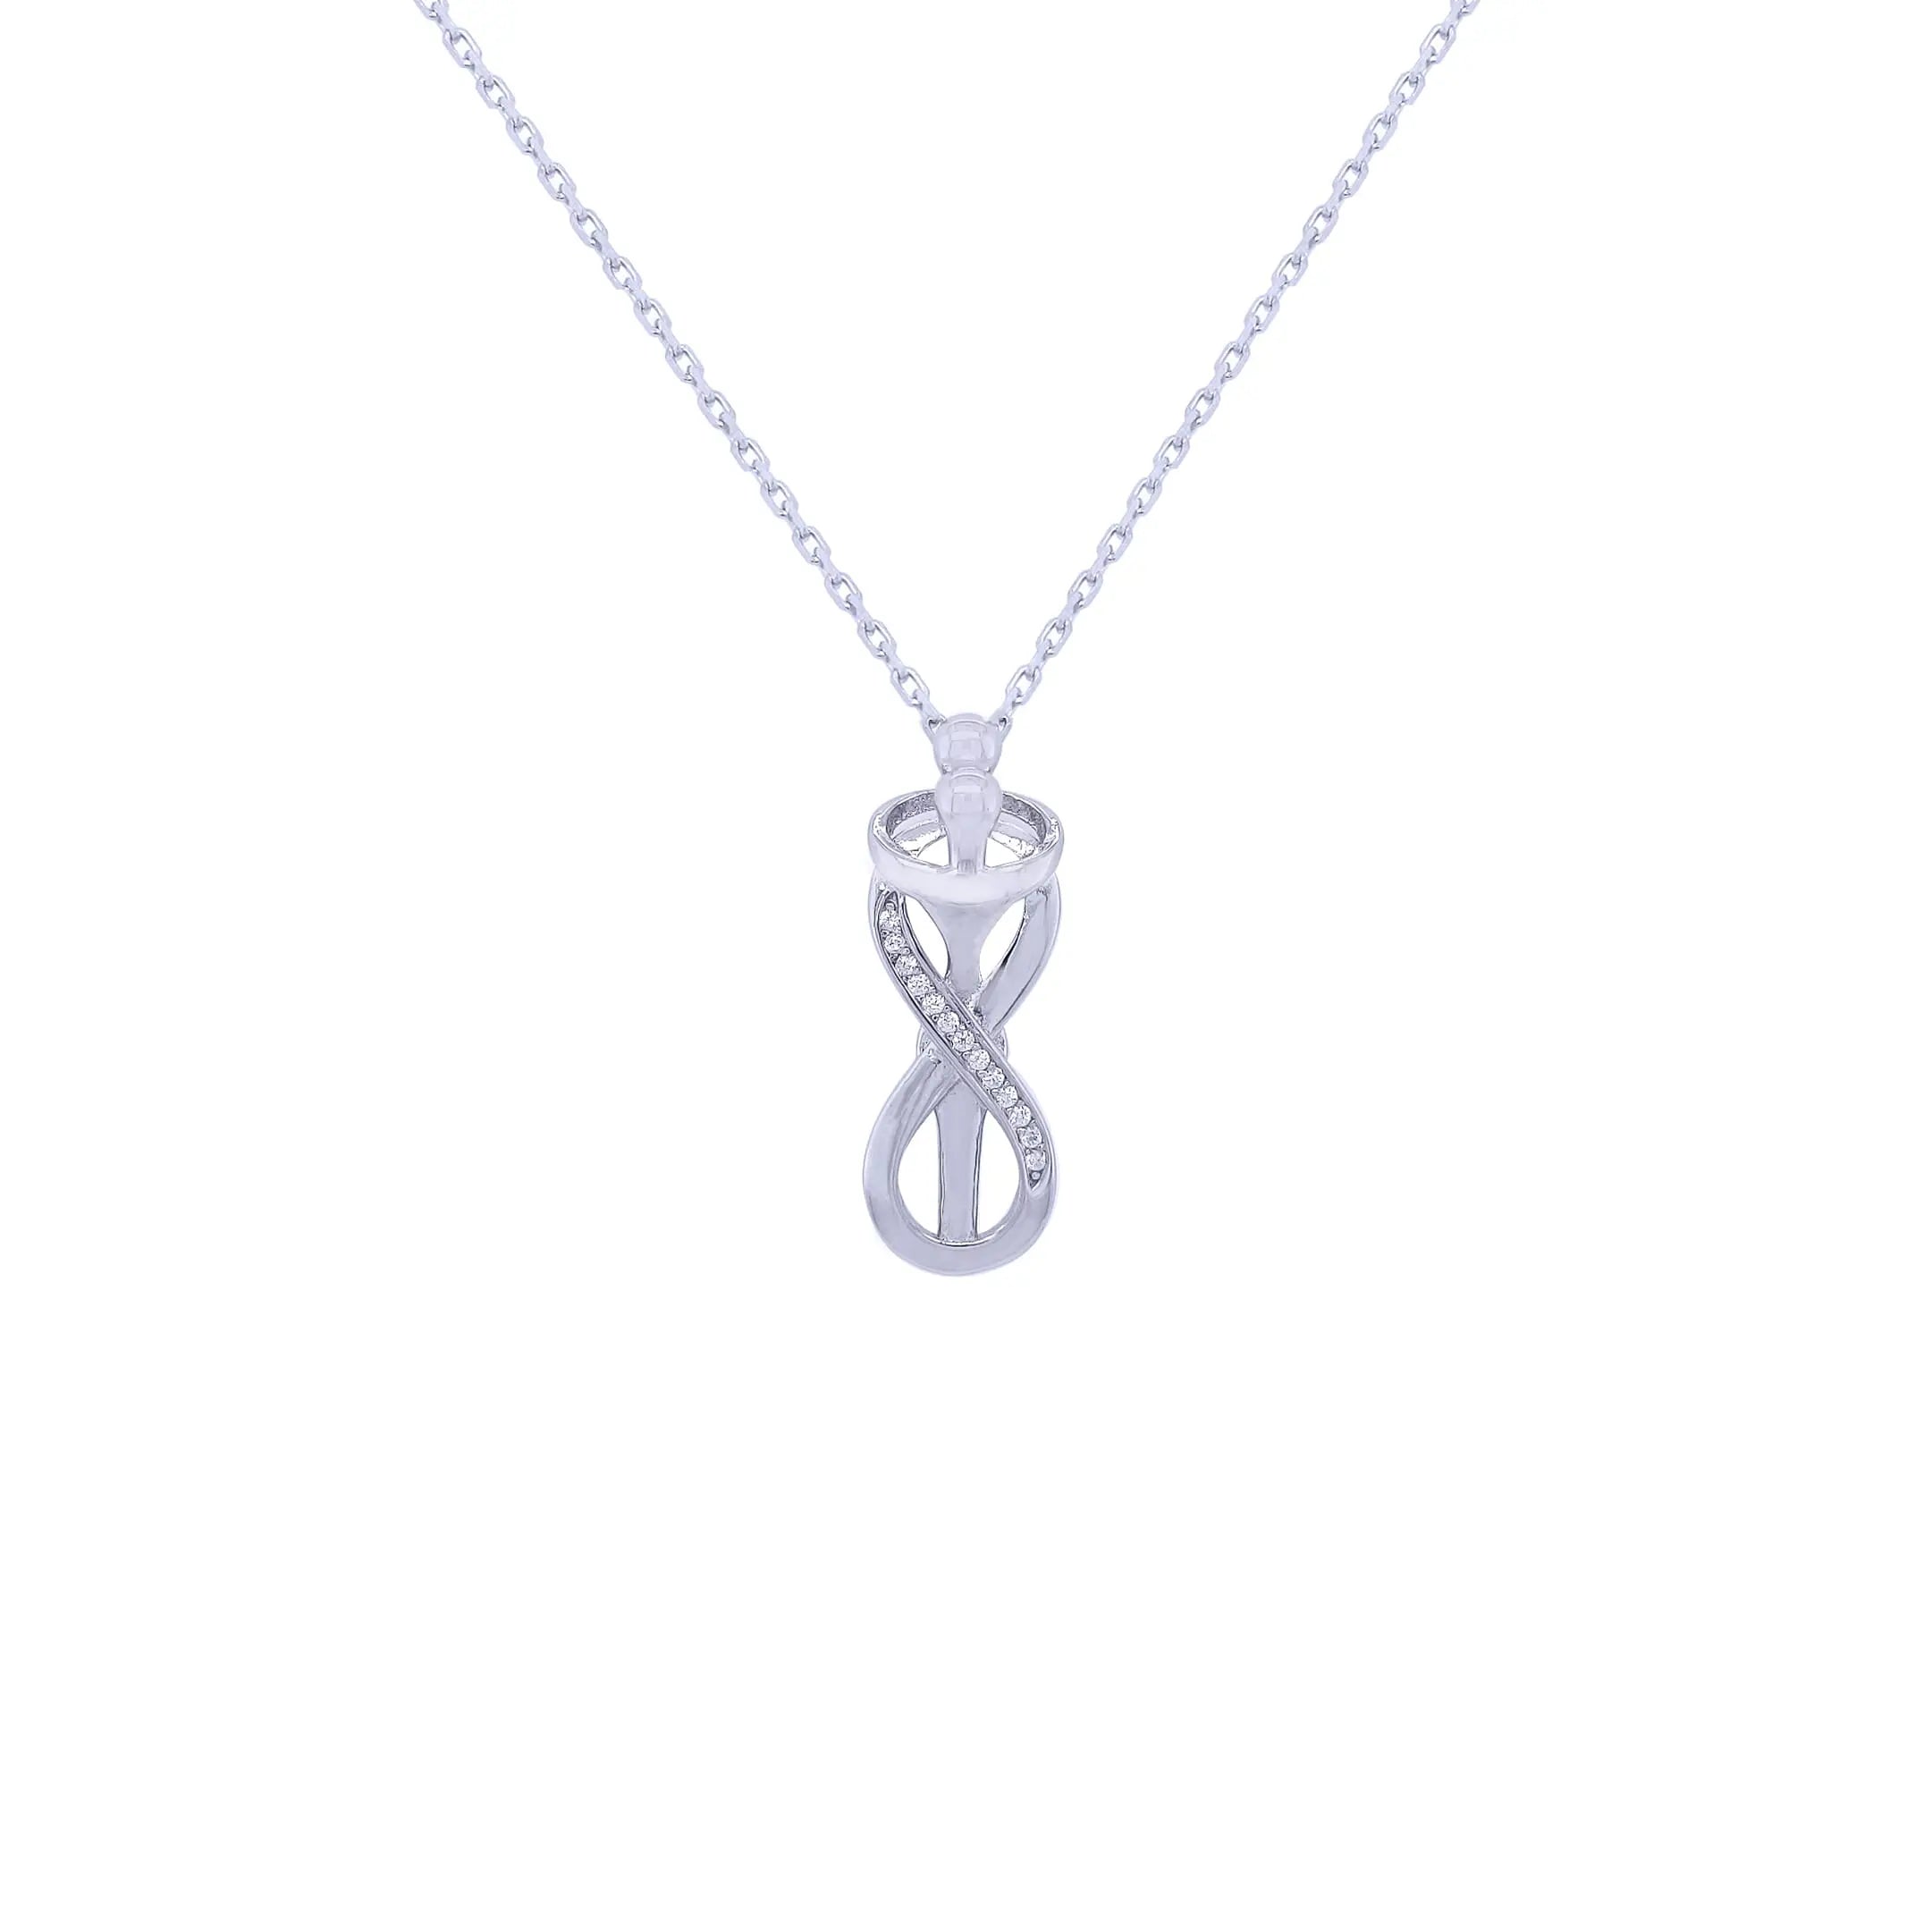 Asfour Sterling Silver 925 With Eternal Hug Design Pendant-Necklaces-Asfour Crystal